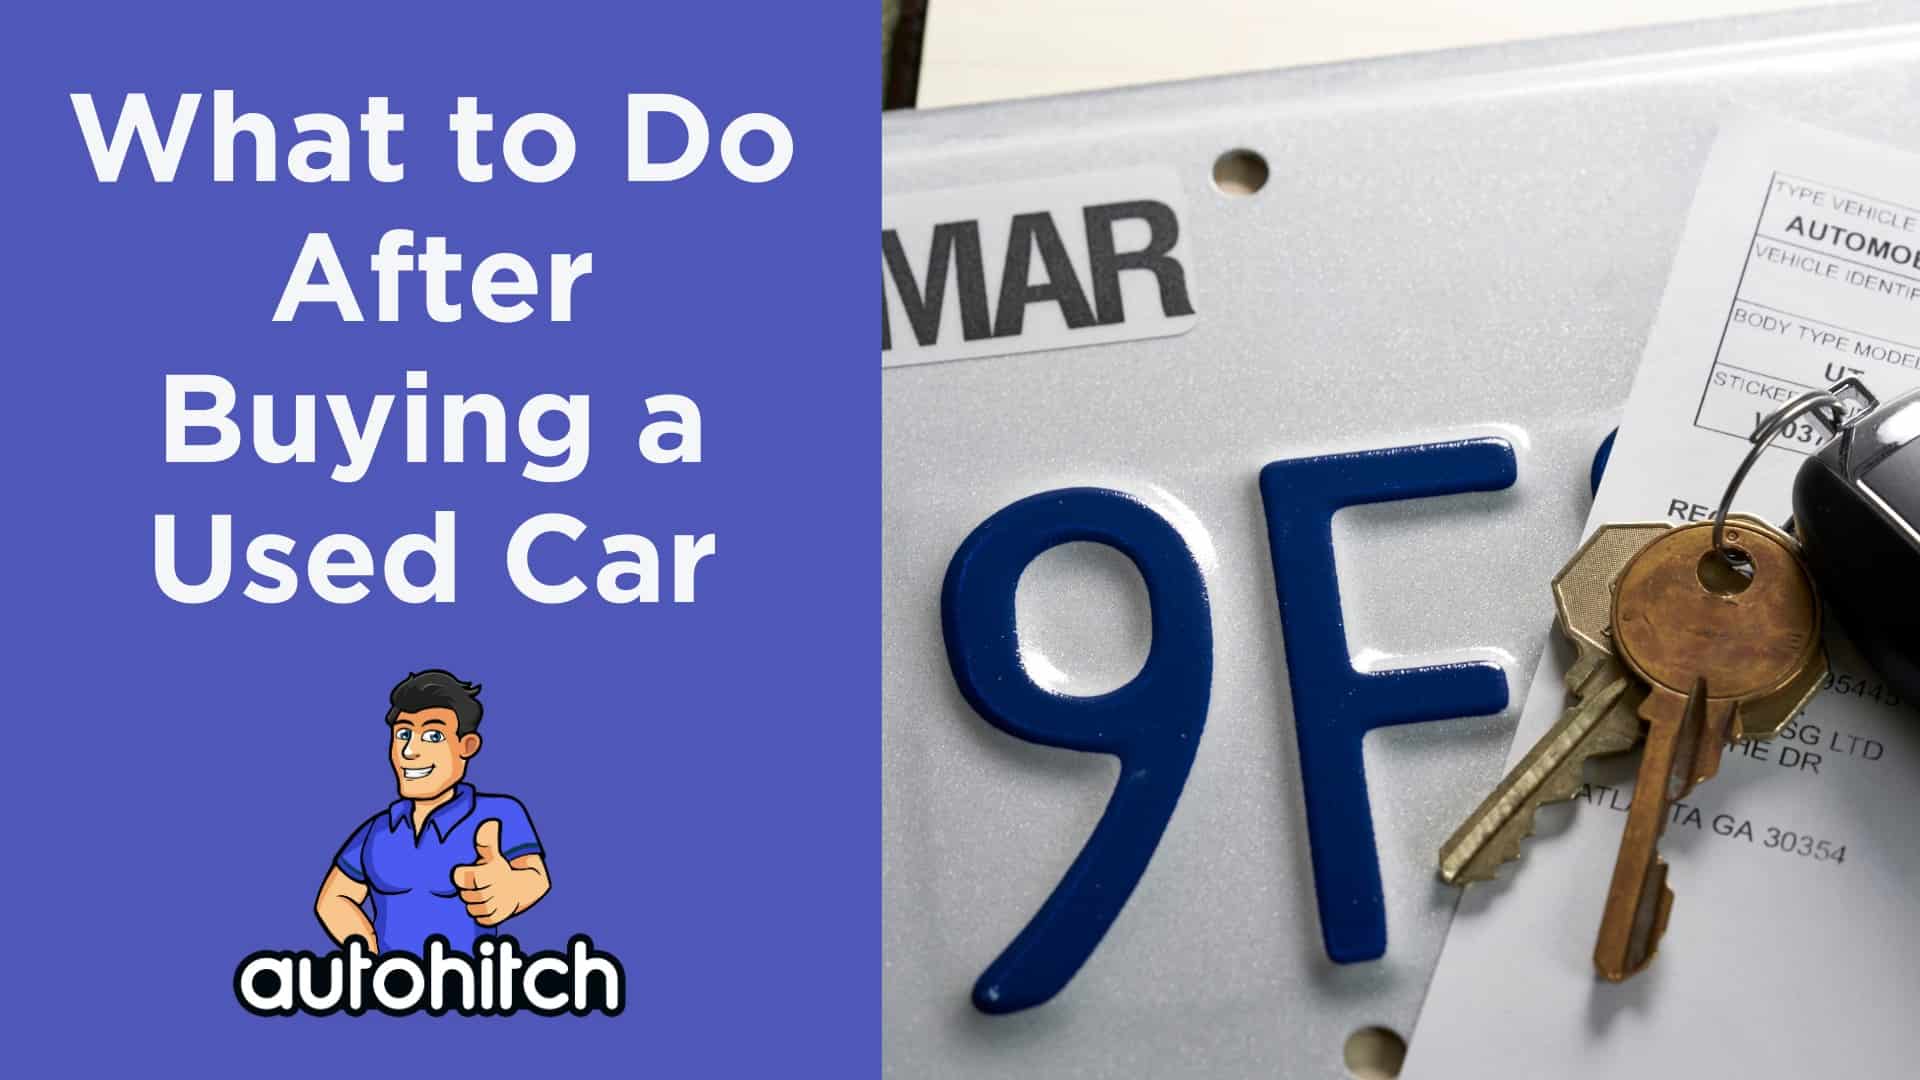 What to Do After Buying a Used Car